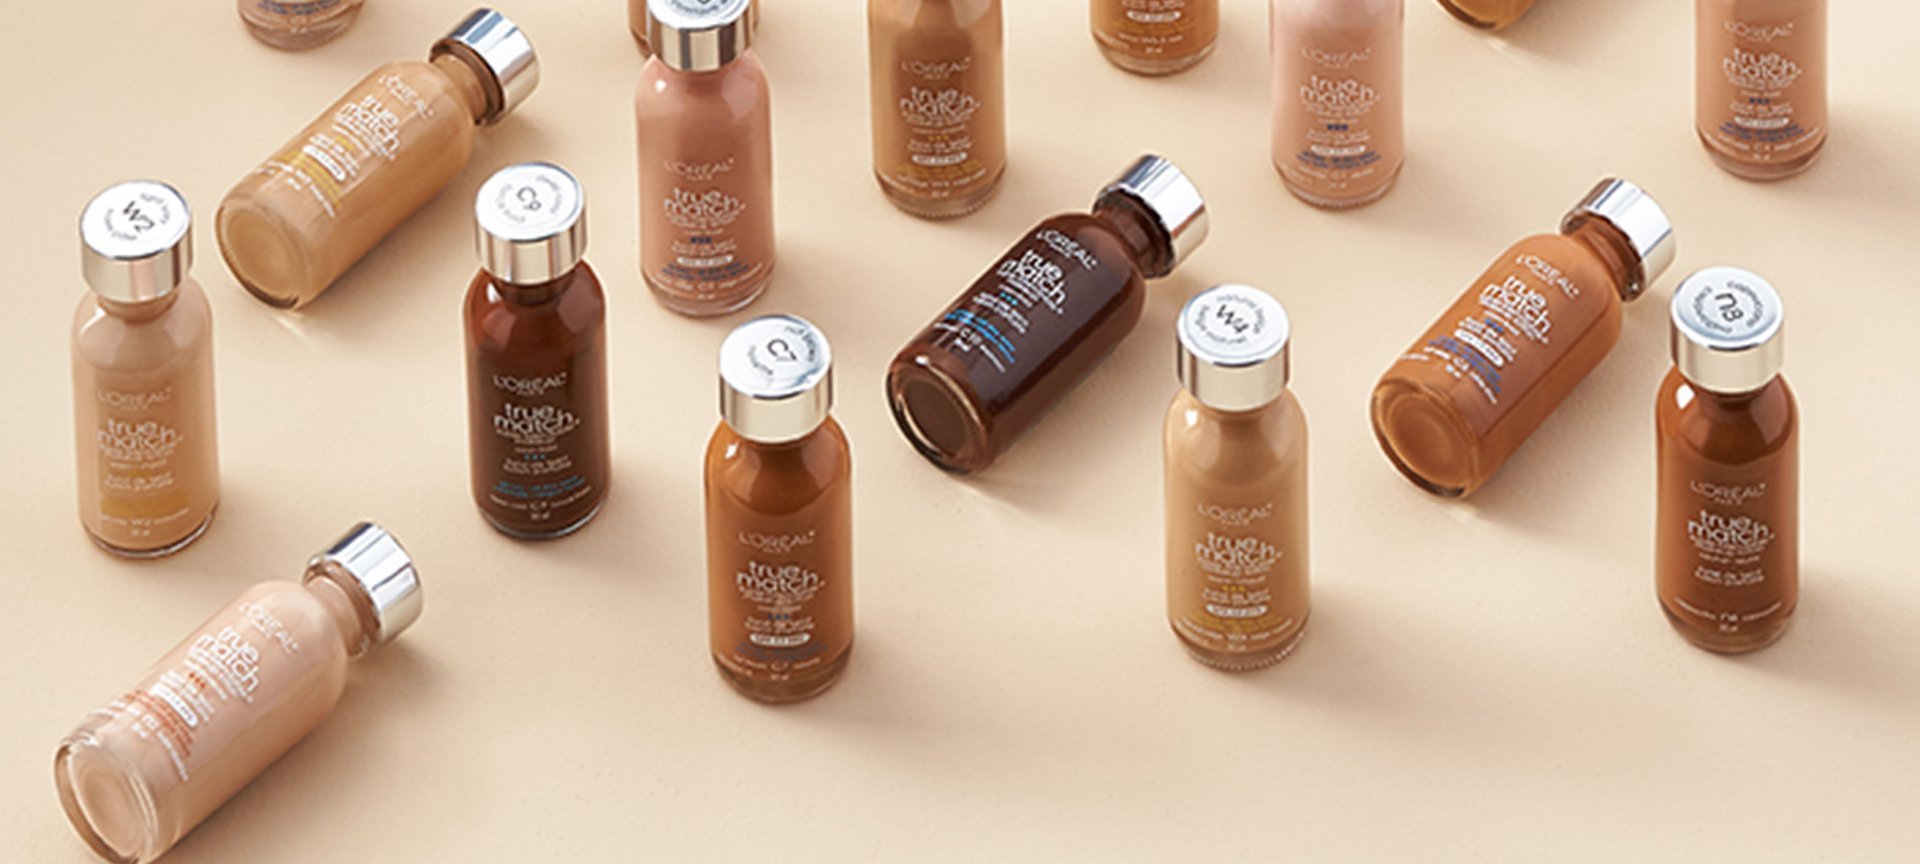 Foundation How-To: Picking the Right Shade for Your Skin Undertone